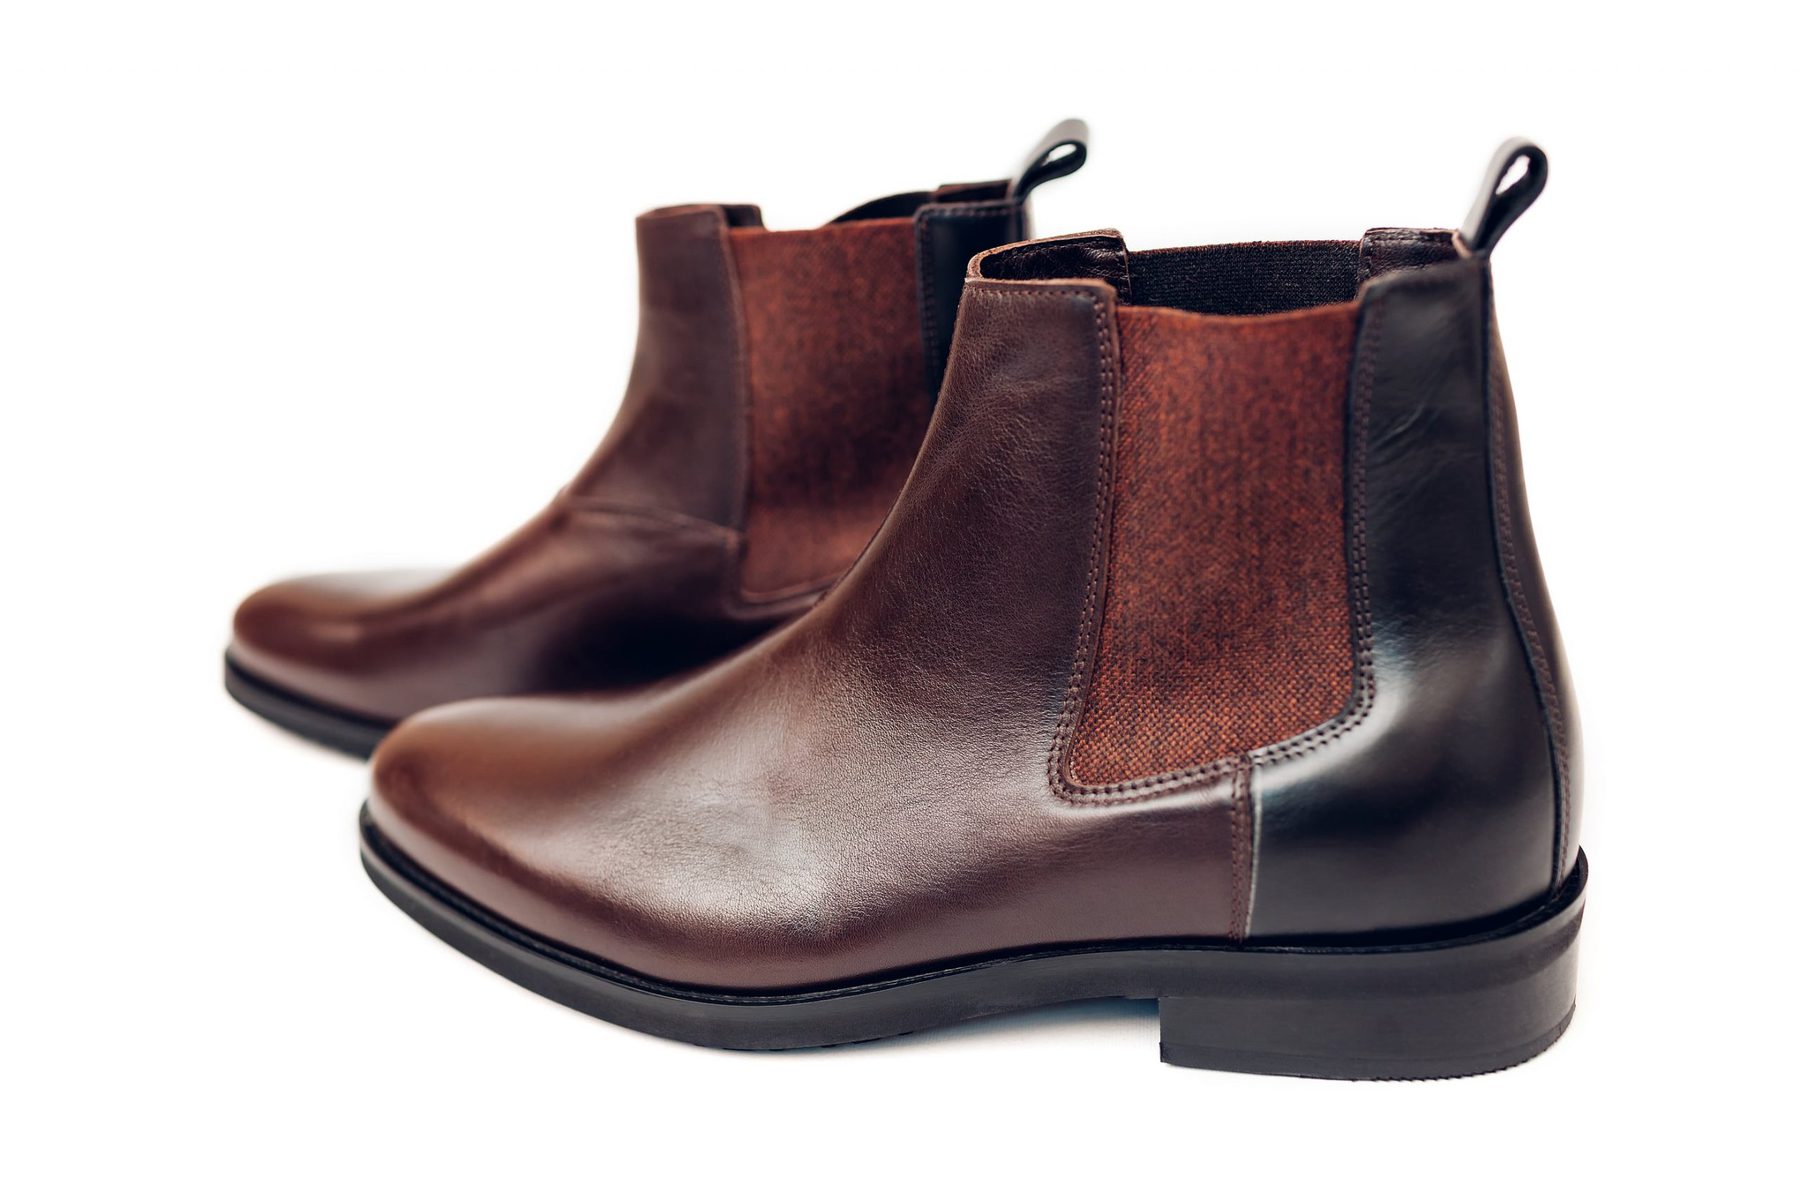 most durable chelsea boots